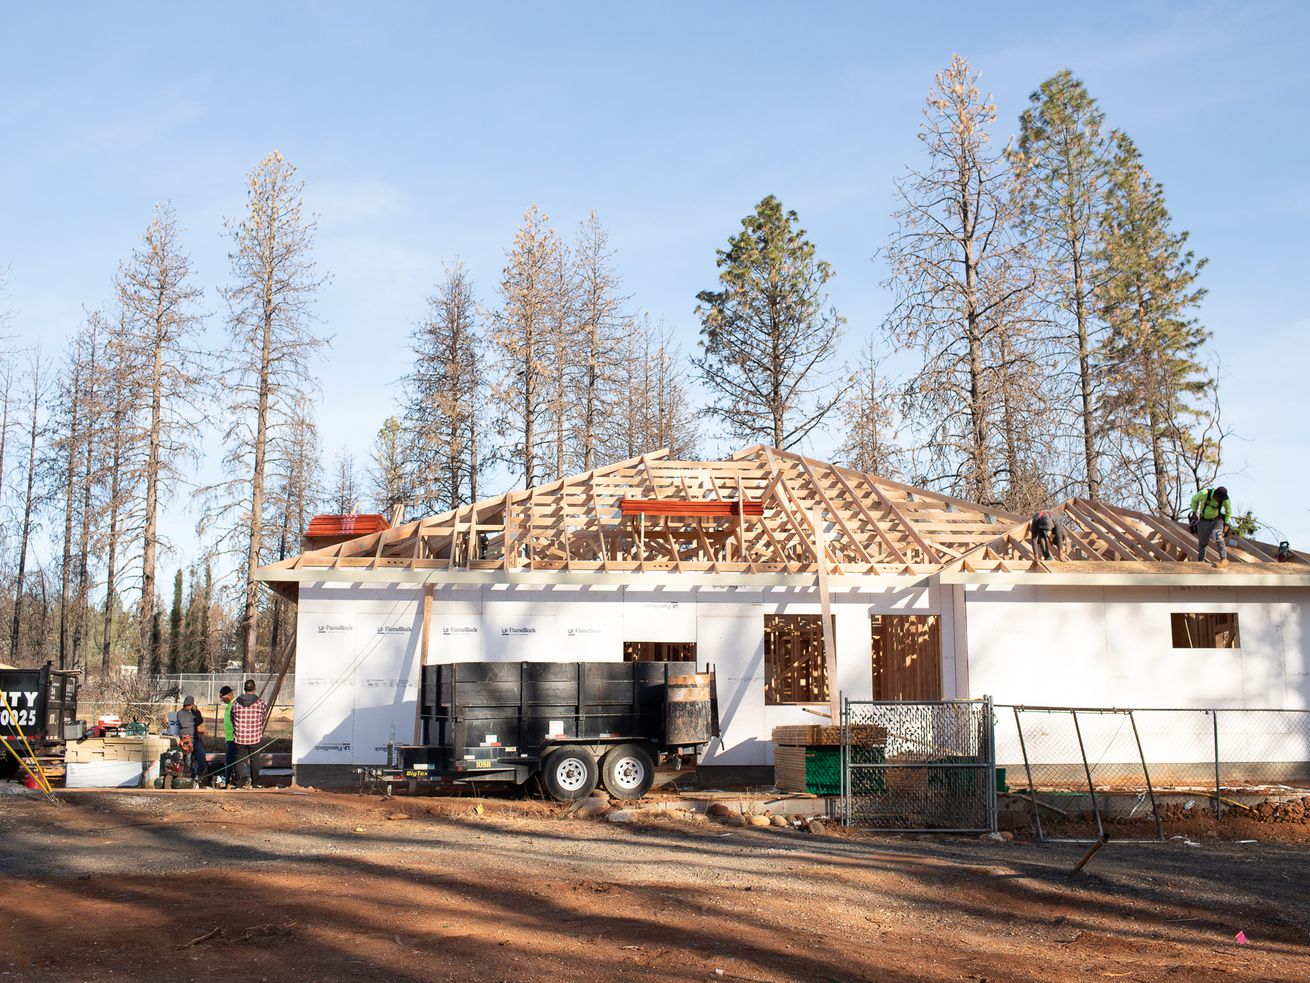 A house in Paradise, California being built.